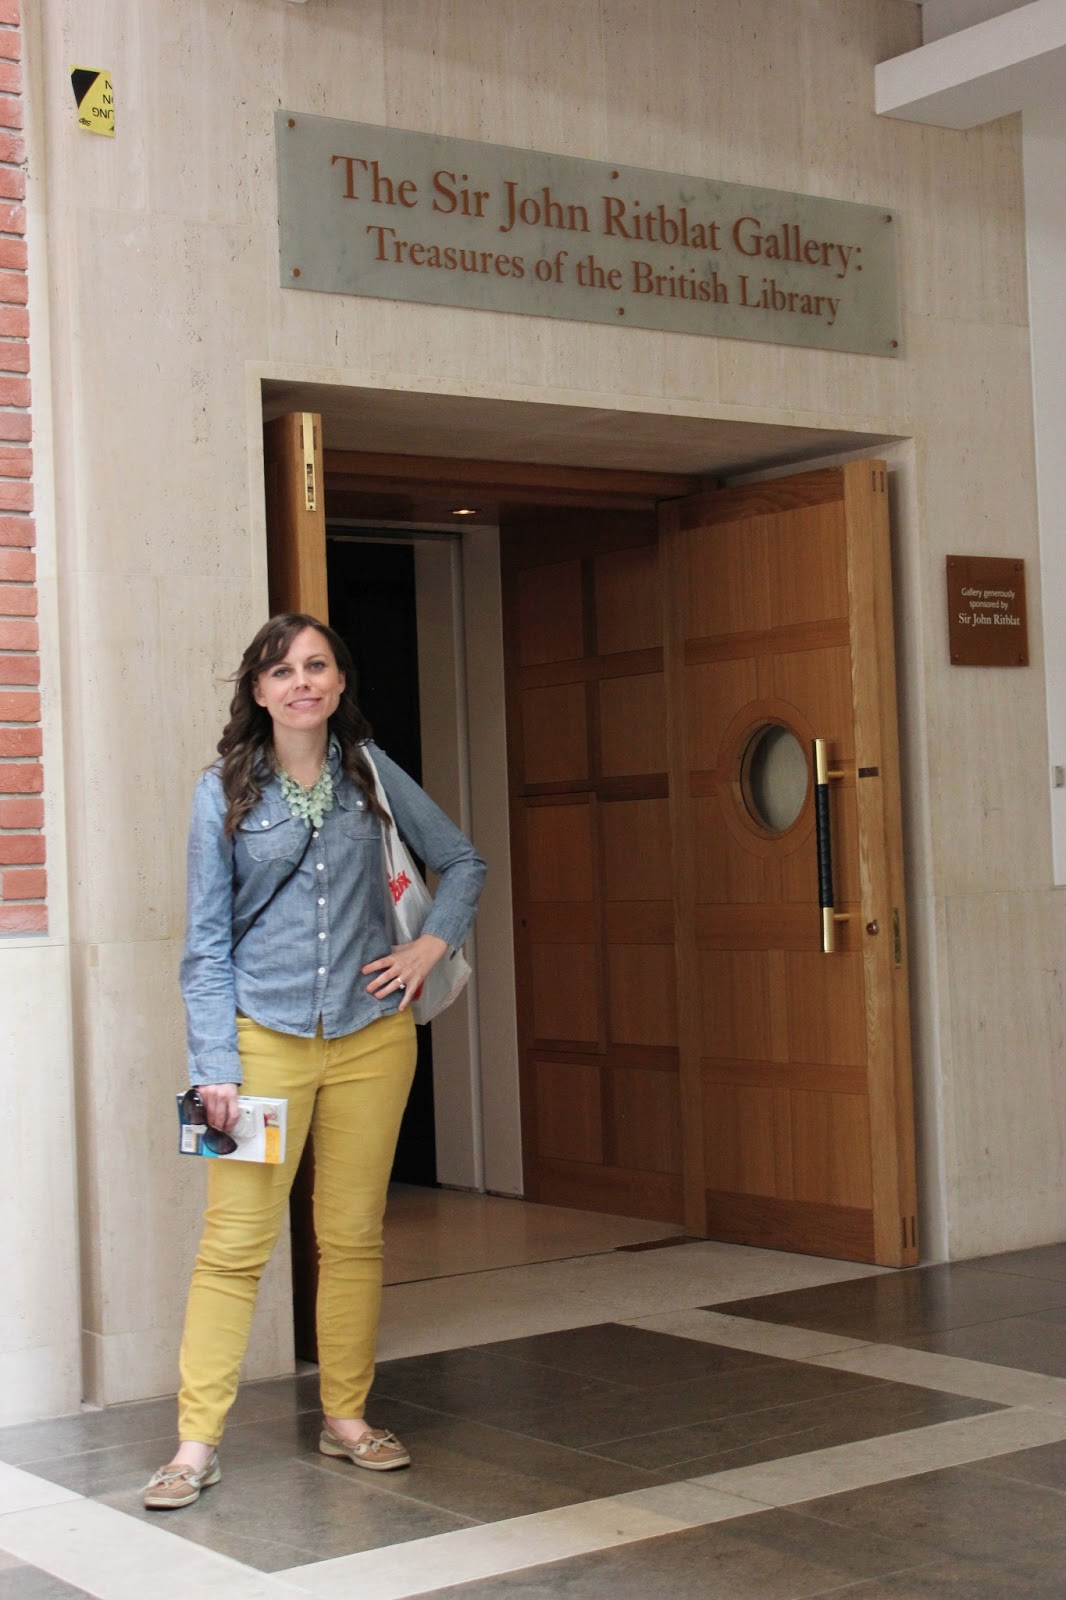 London Day 4: The British Library